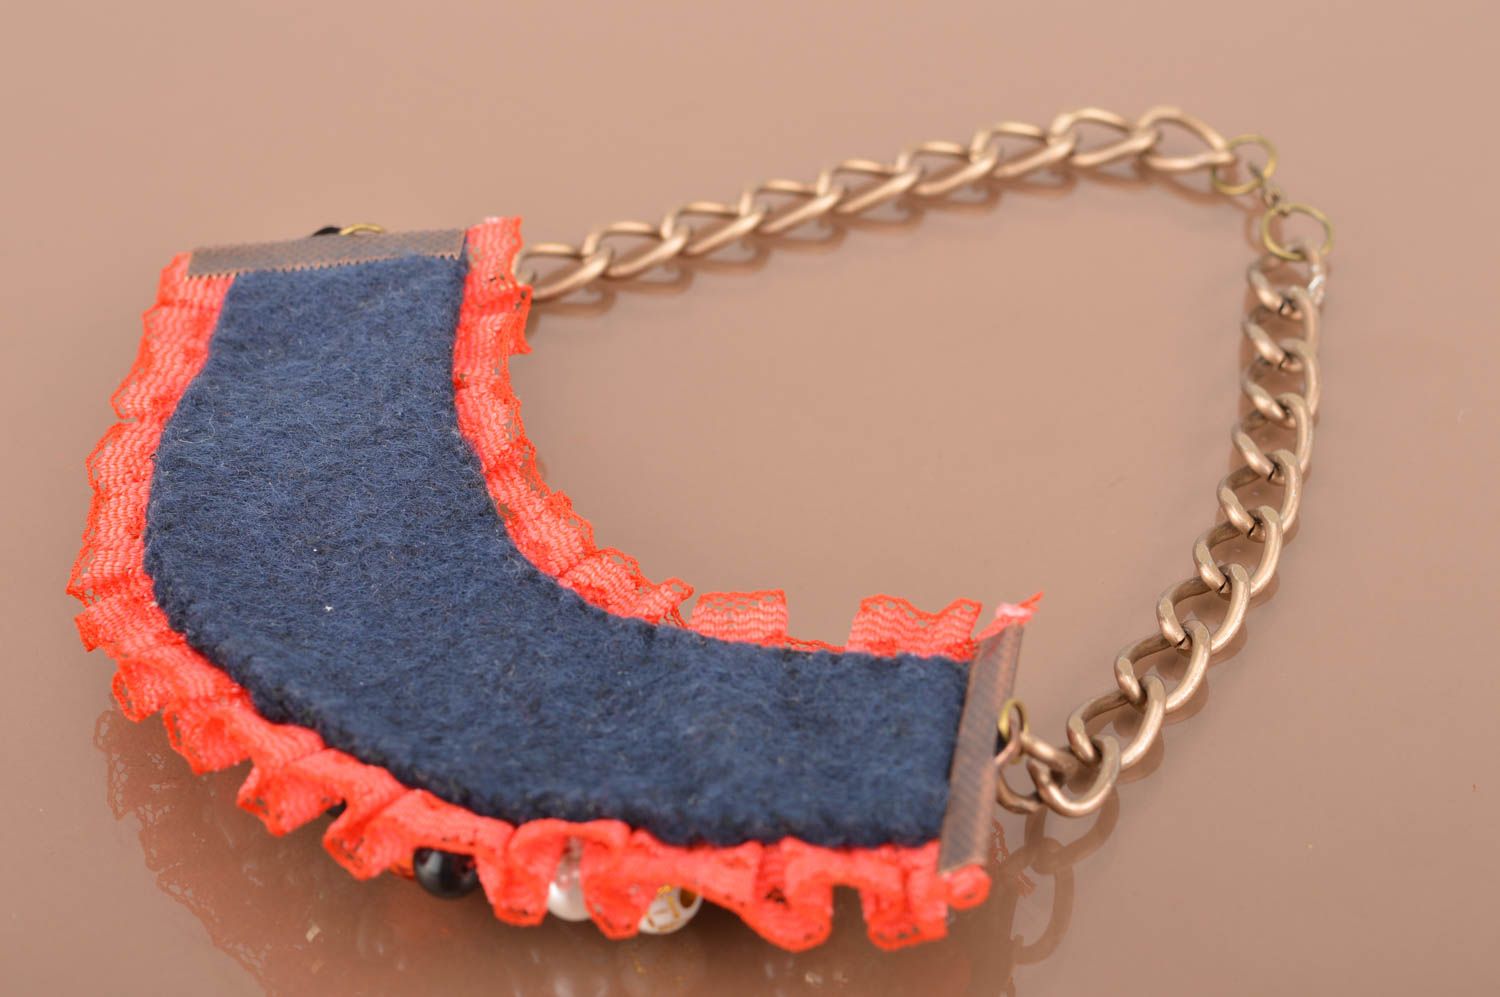 Designer beautiful massive necklace on chain made of metal with beads and lace photo 5